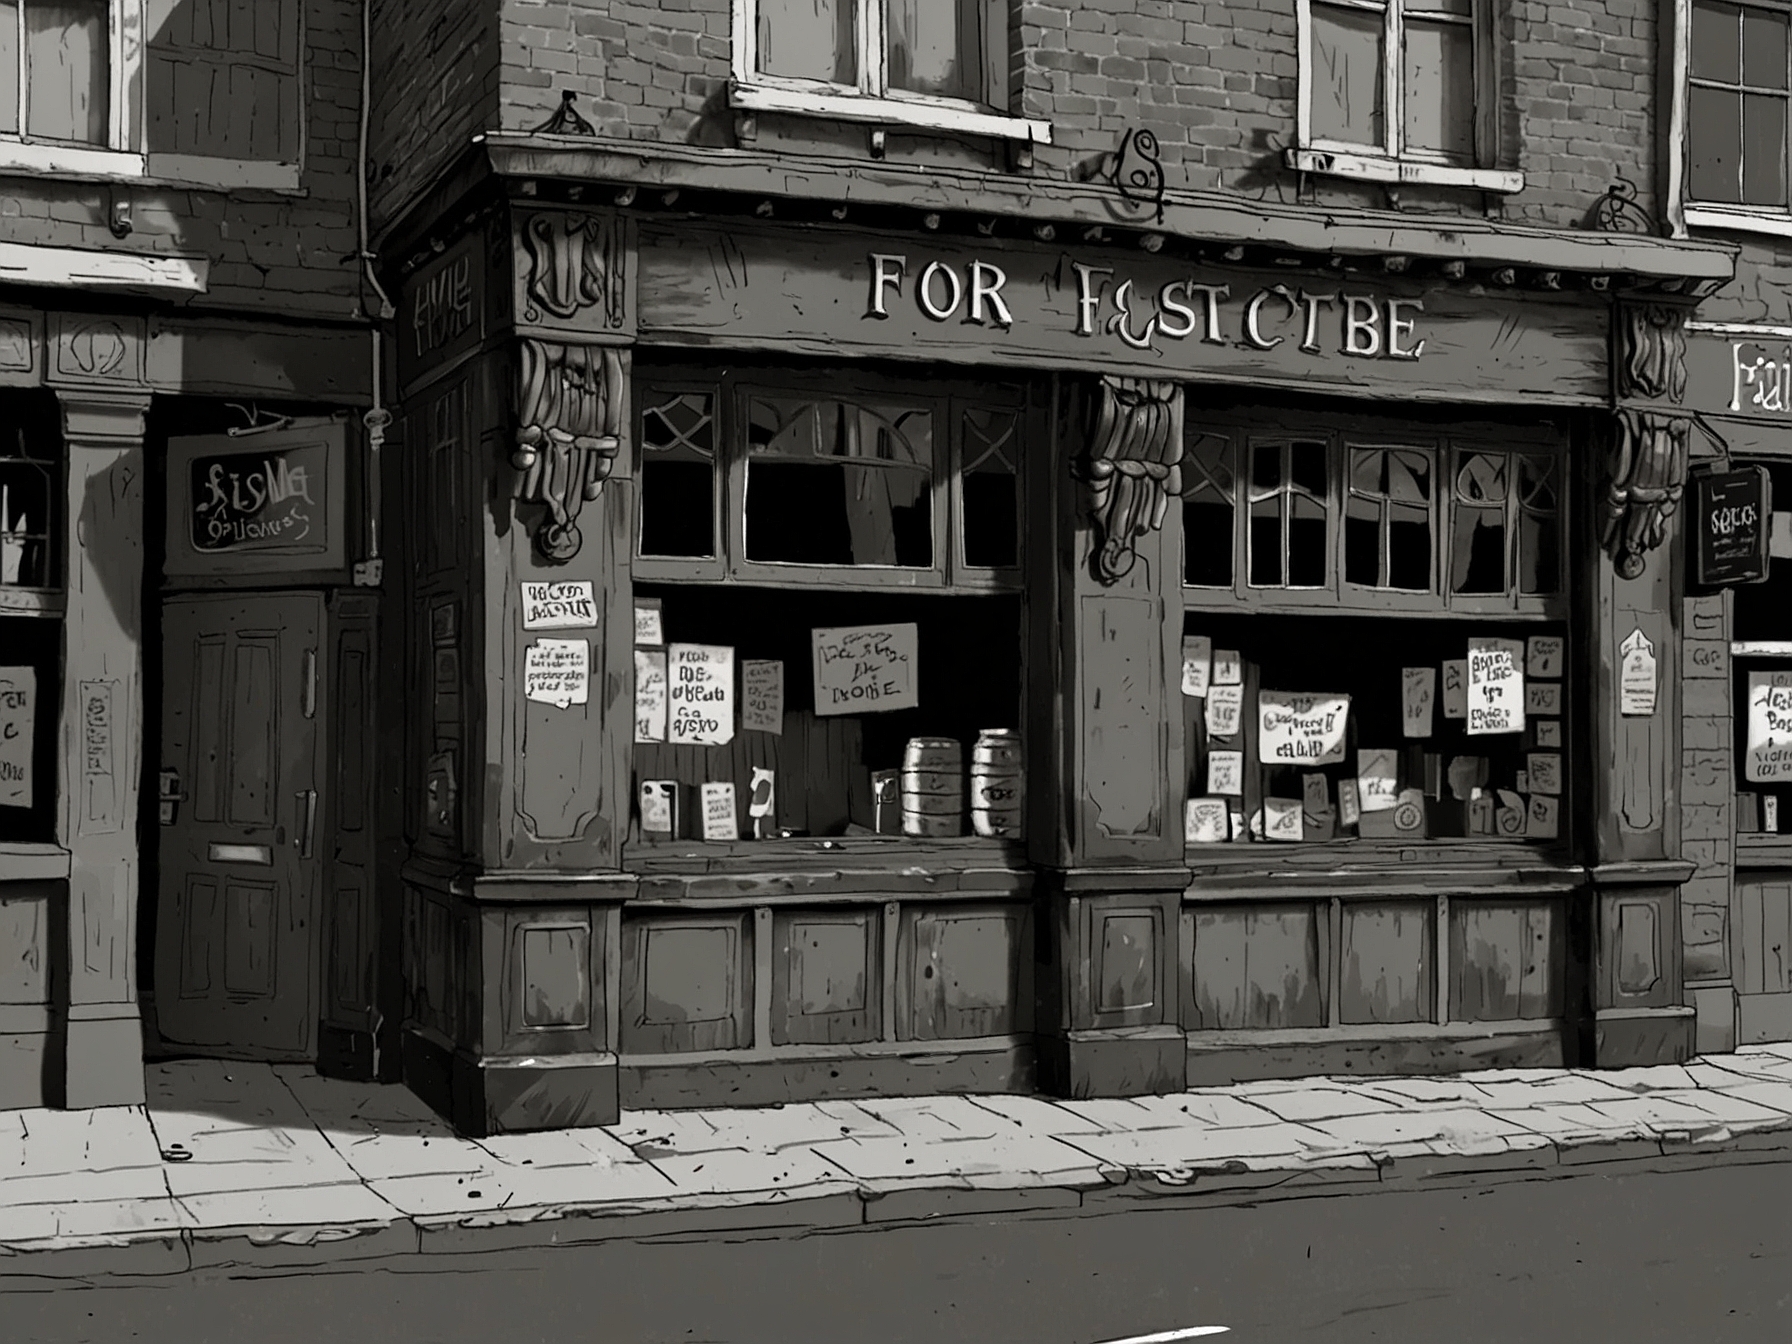 An image showing a once-bustling English pub now closed and boarded up, with 'For Sale' and 'To Let' signs, capturing the economic and social impact of the widespread pub closures.